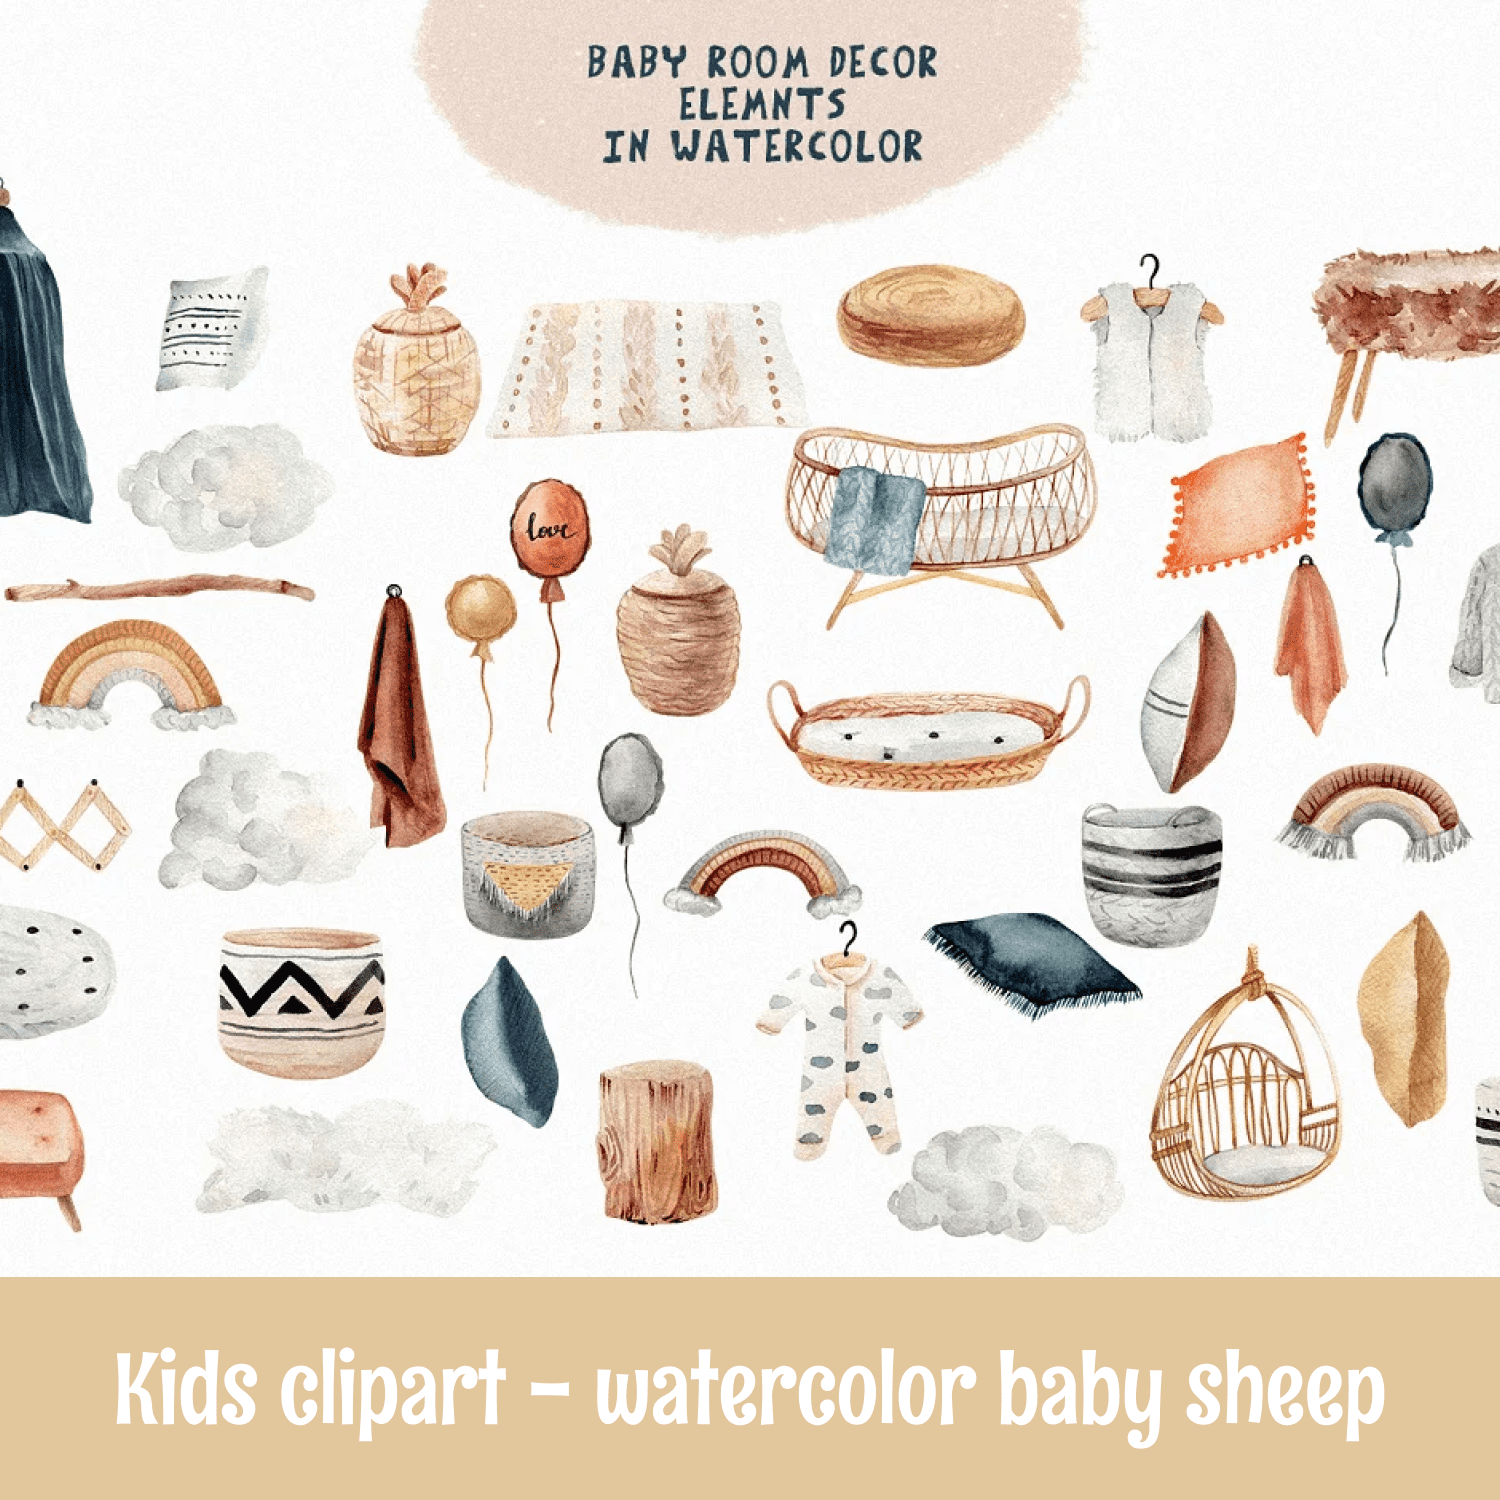 Kids clipart - watercolor baby sheep cover.